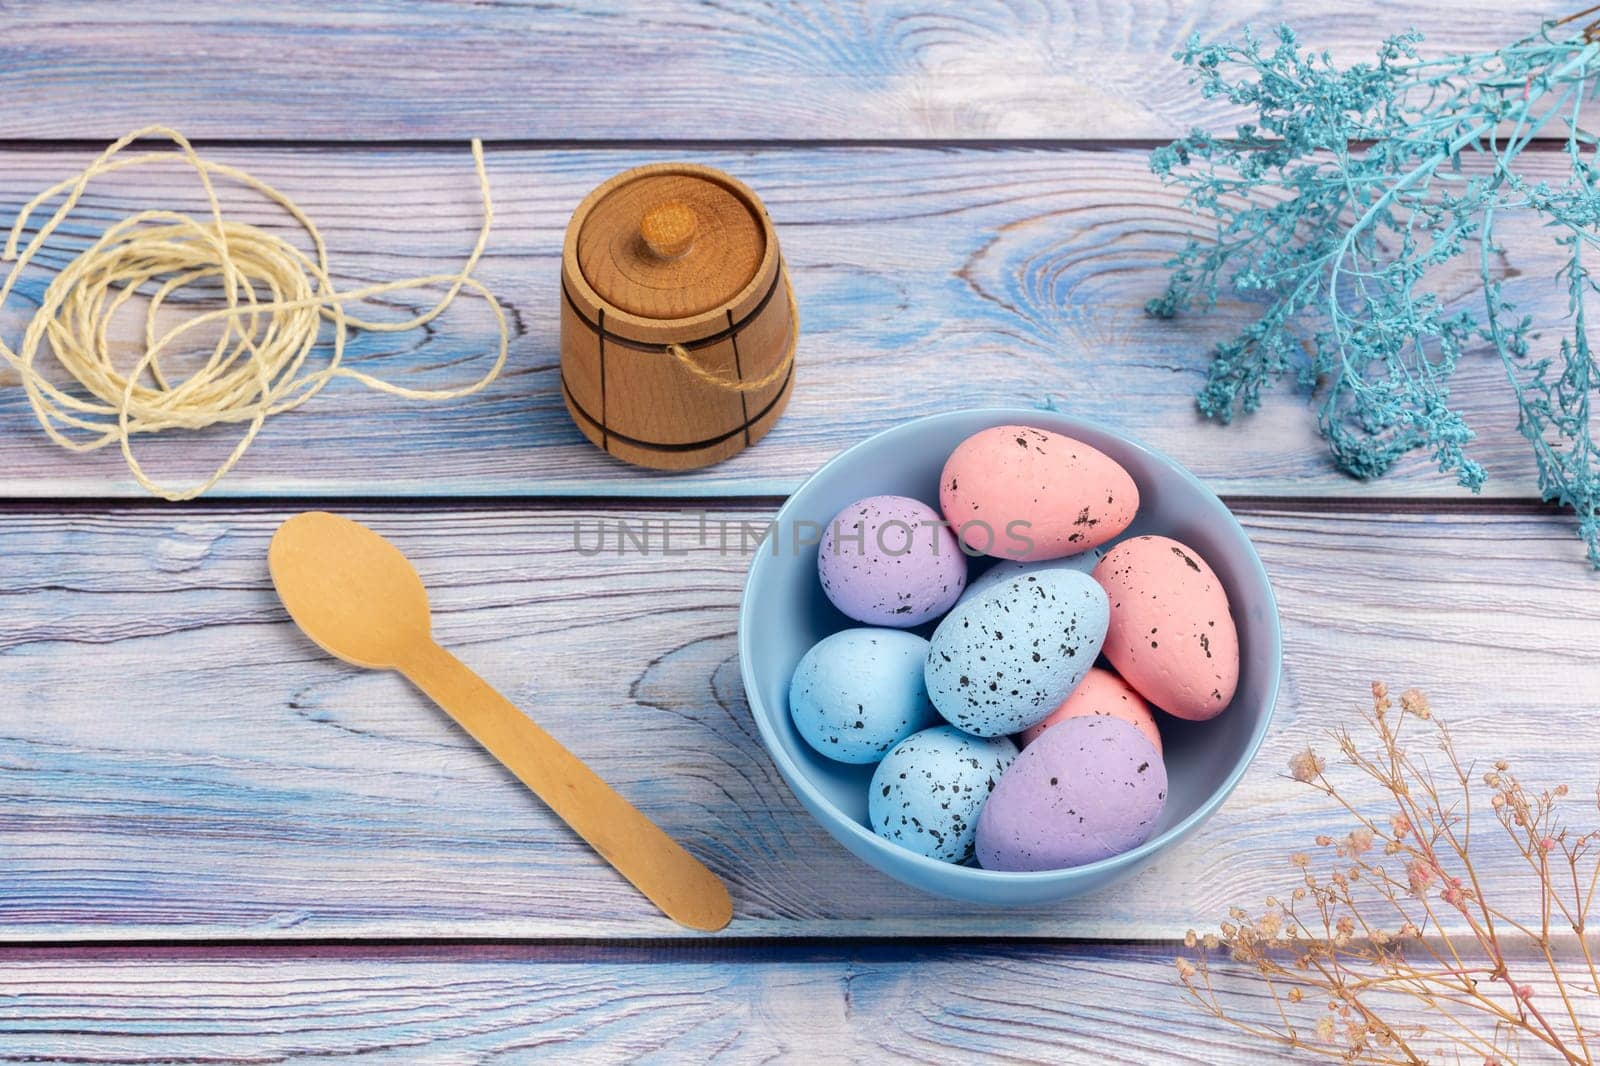 Bowl with colored Easter eggs, a small wooden barrel, a wooden spoon and a rope on the boards. Top view.